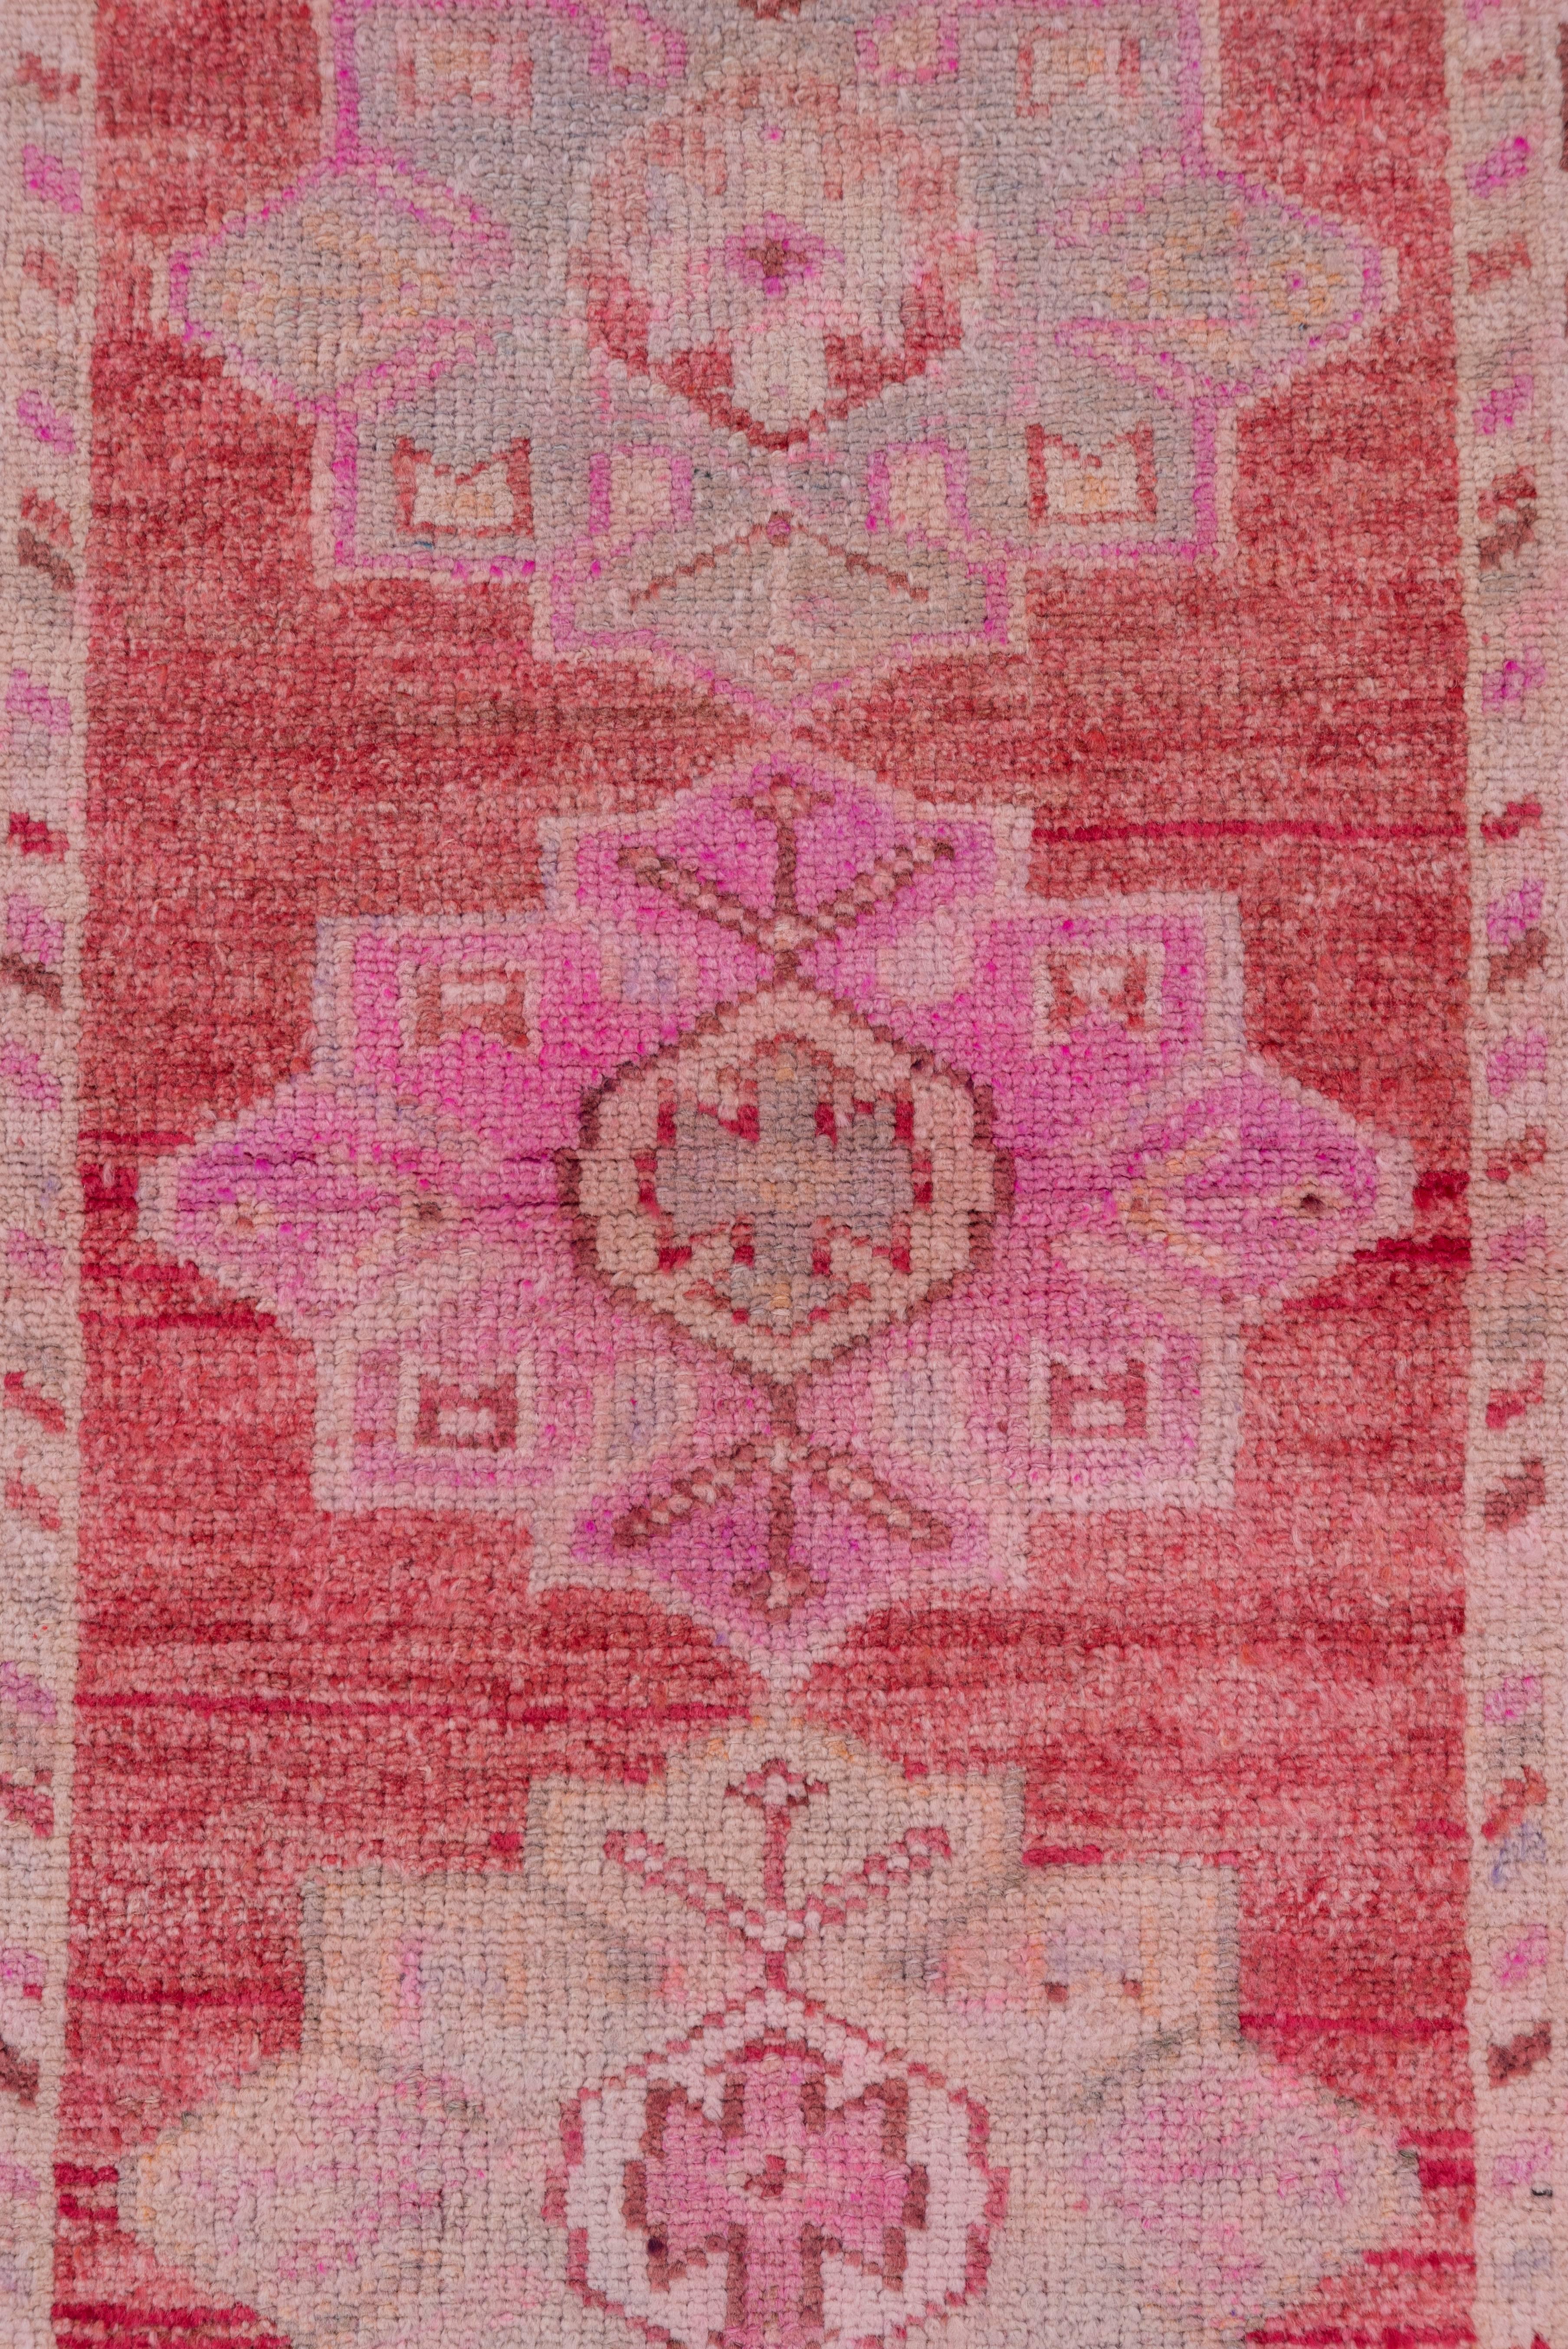 Hand-Knotted Pink Oushak Runner, circa 1940s